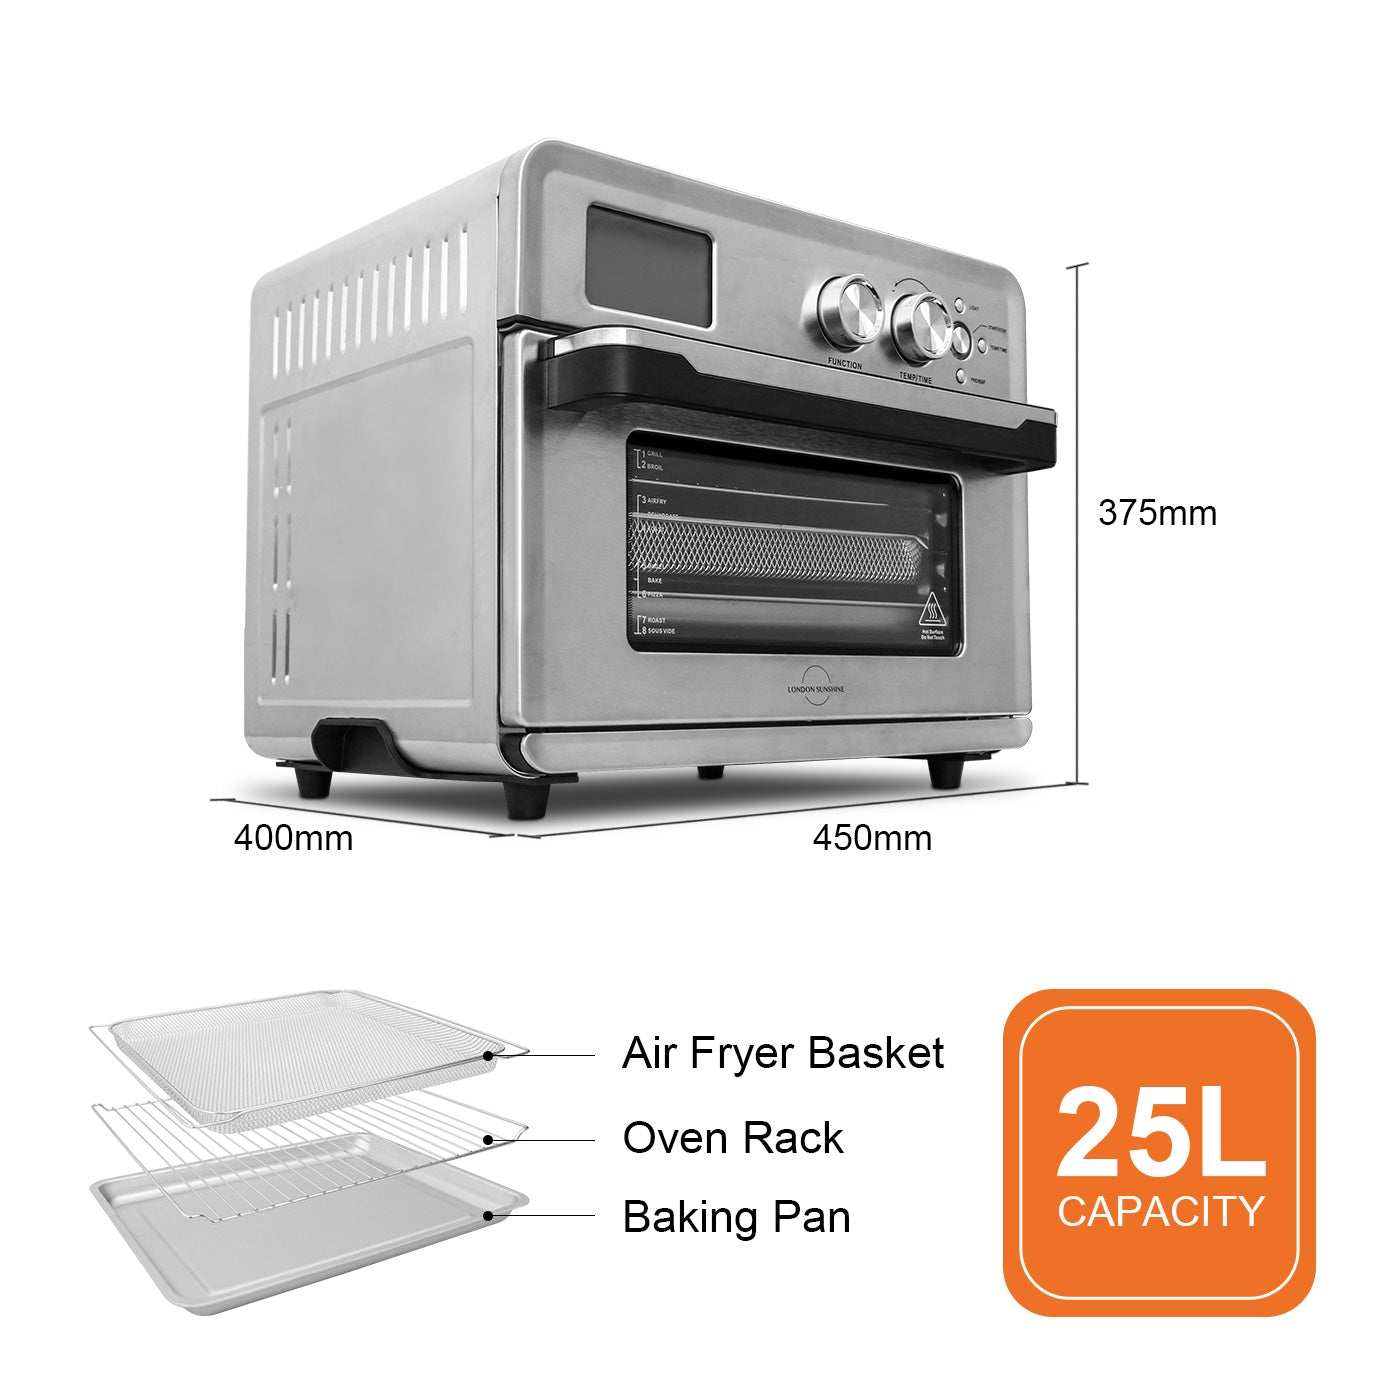 LCD Digital Display Air Fryer Convection Oven